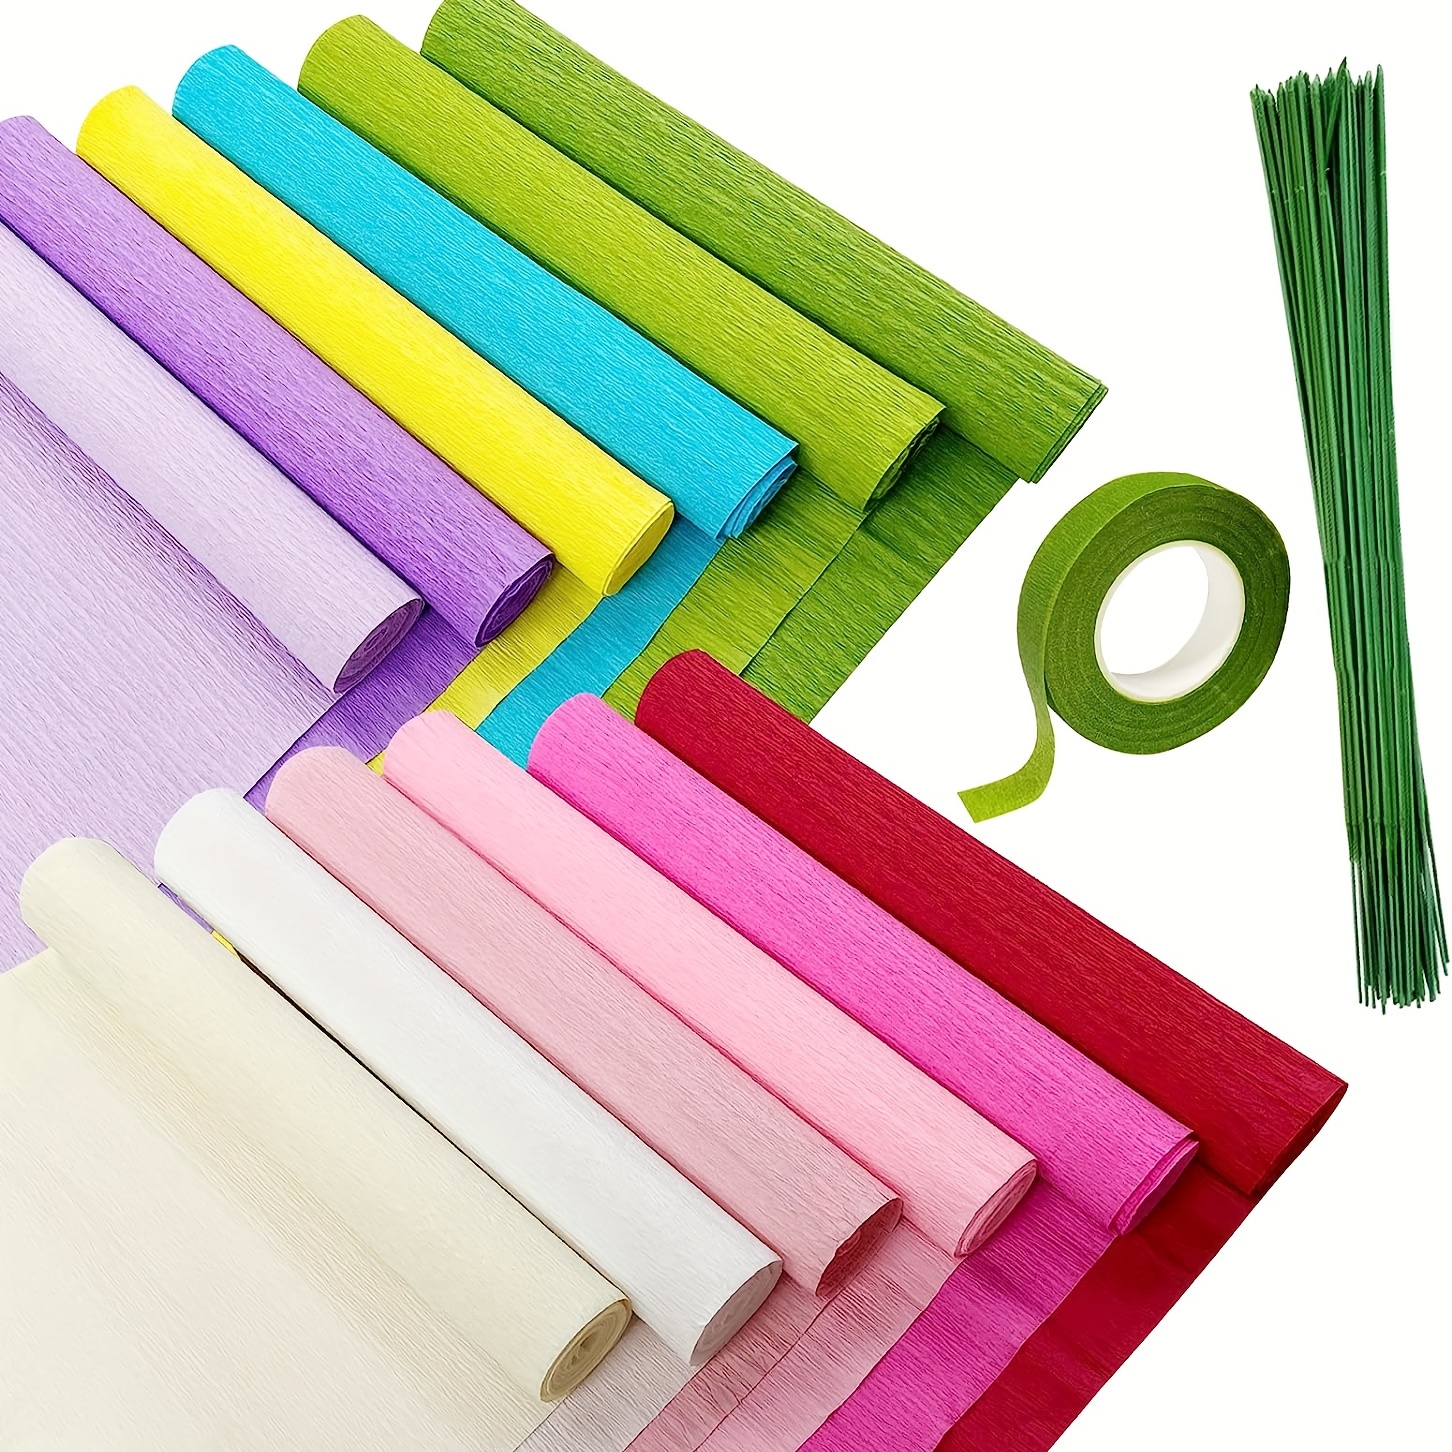 12 Rolls 8 Feet Crepe Paper Sheets Rolls 10 Inch Crepe Paper Streamer 103  Pcs Floral Arrangement Kit Green Floral Tape Floral Wire Stems Wire Cutter  for Wreath Flower Making Supplies (Elegant Colors)